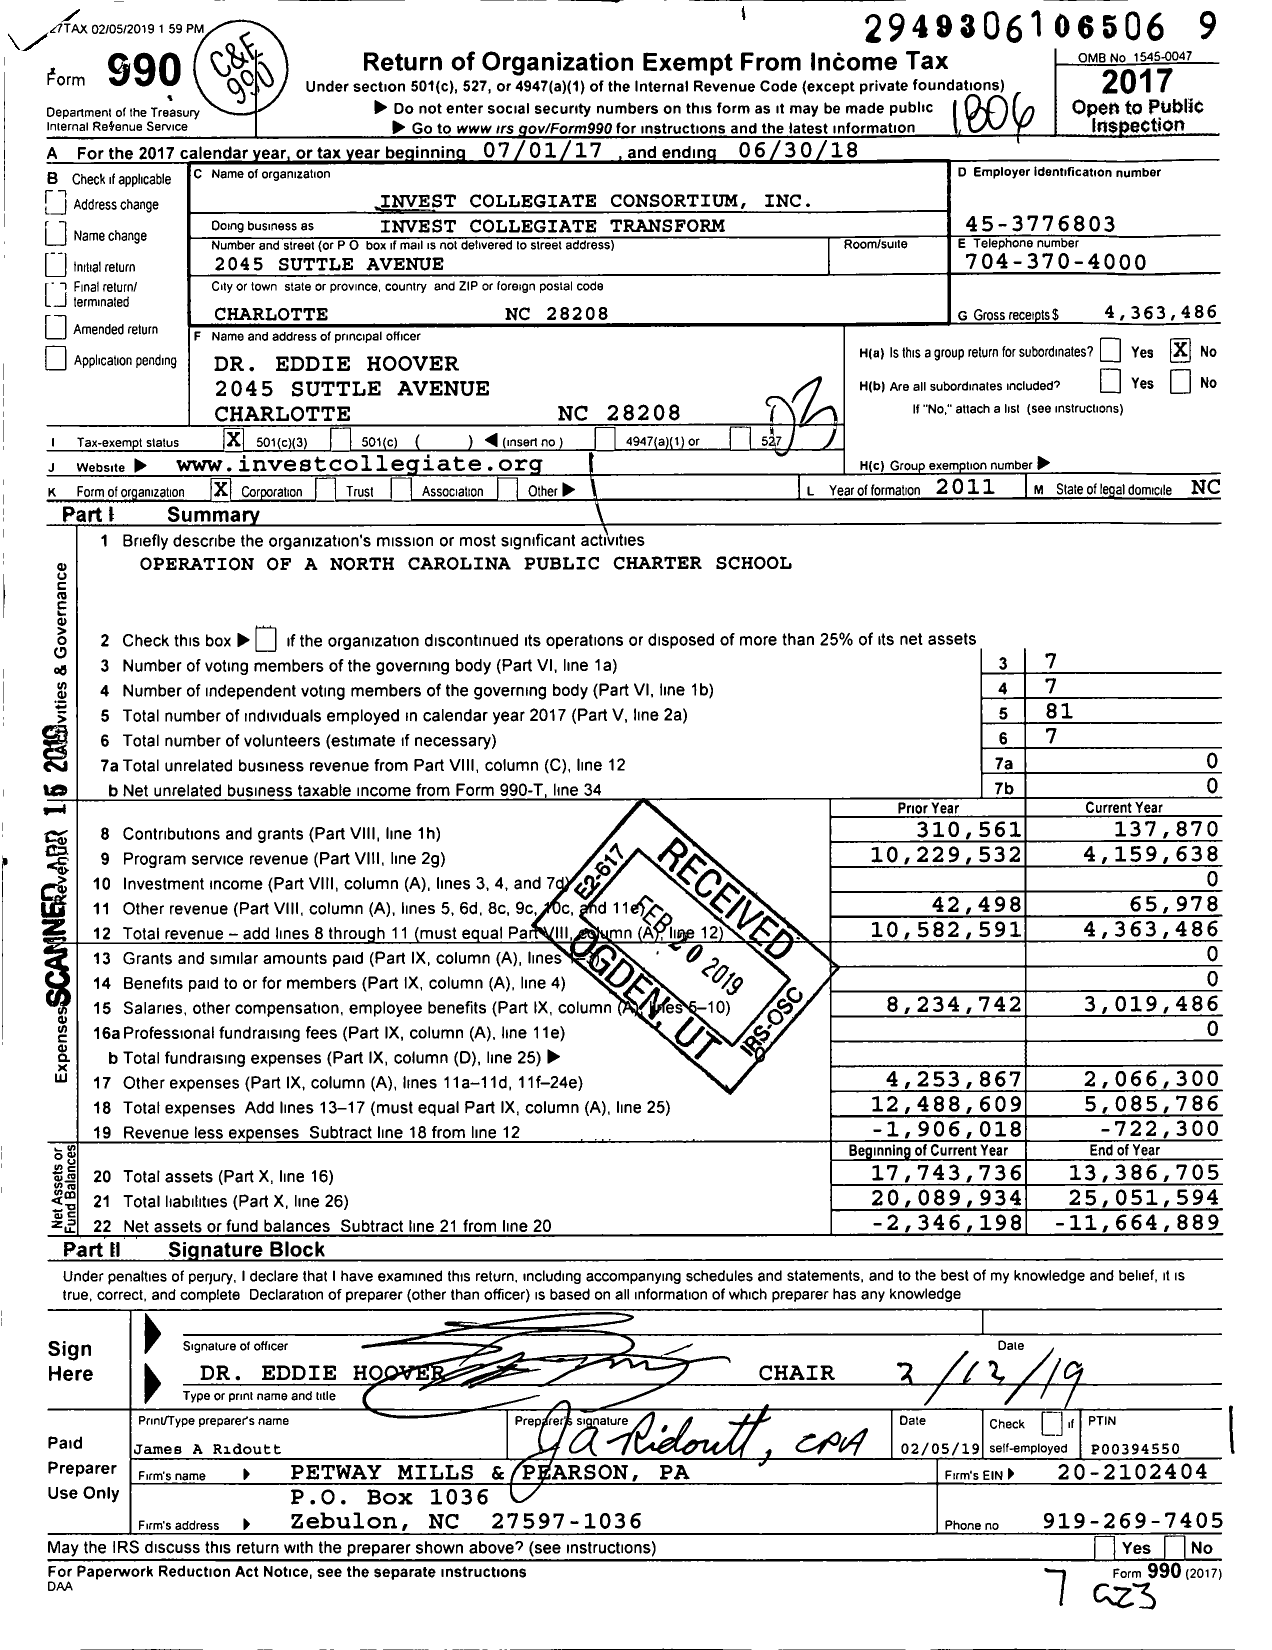 Image of first page of 2017 Form 990 for Invest Collegiate Transform